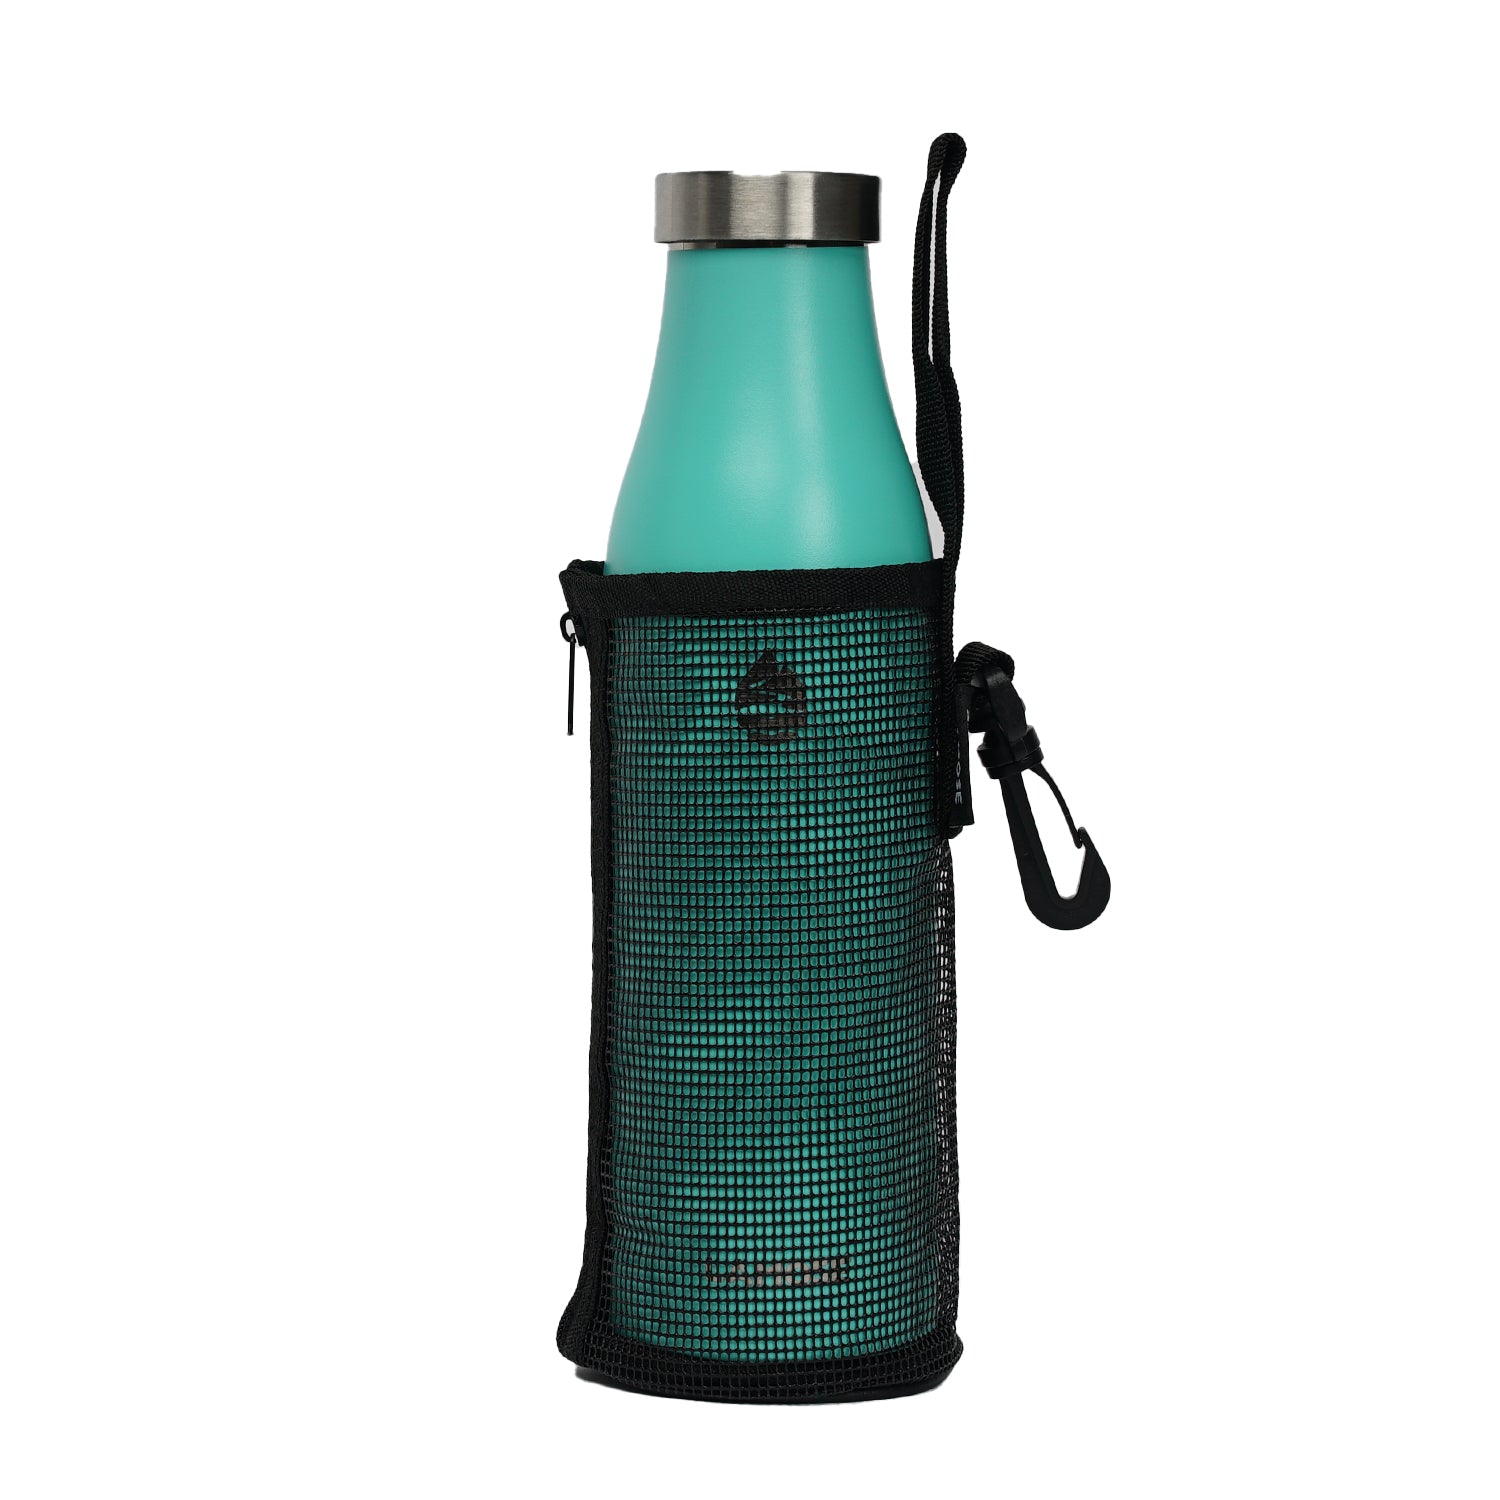 LAMOSE Mesh Bottle Carrier - Perfect fit for Robson and Moraine bottles. Zippered side for easy access, breathable mesh construction, versatile loop handle, and lightweight design. Stay hydrated and hands-free on the go!